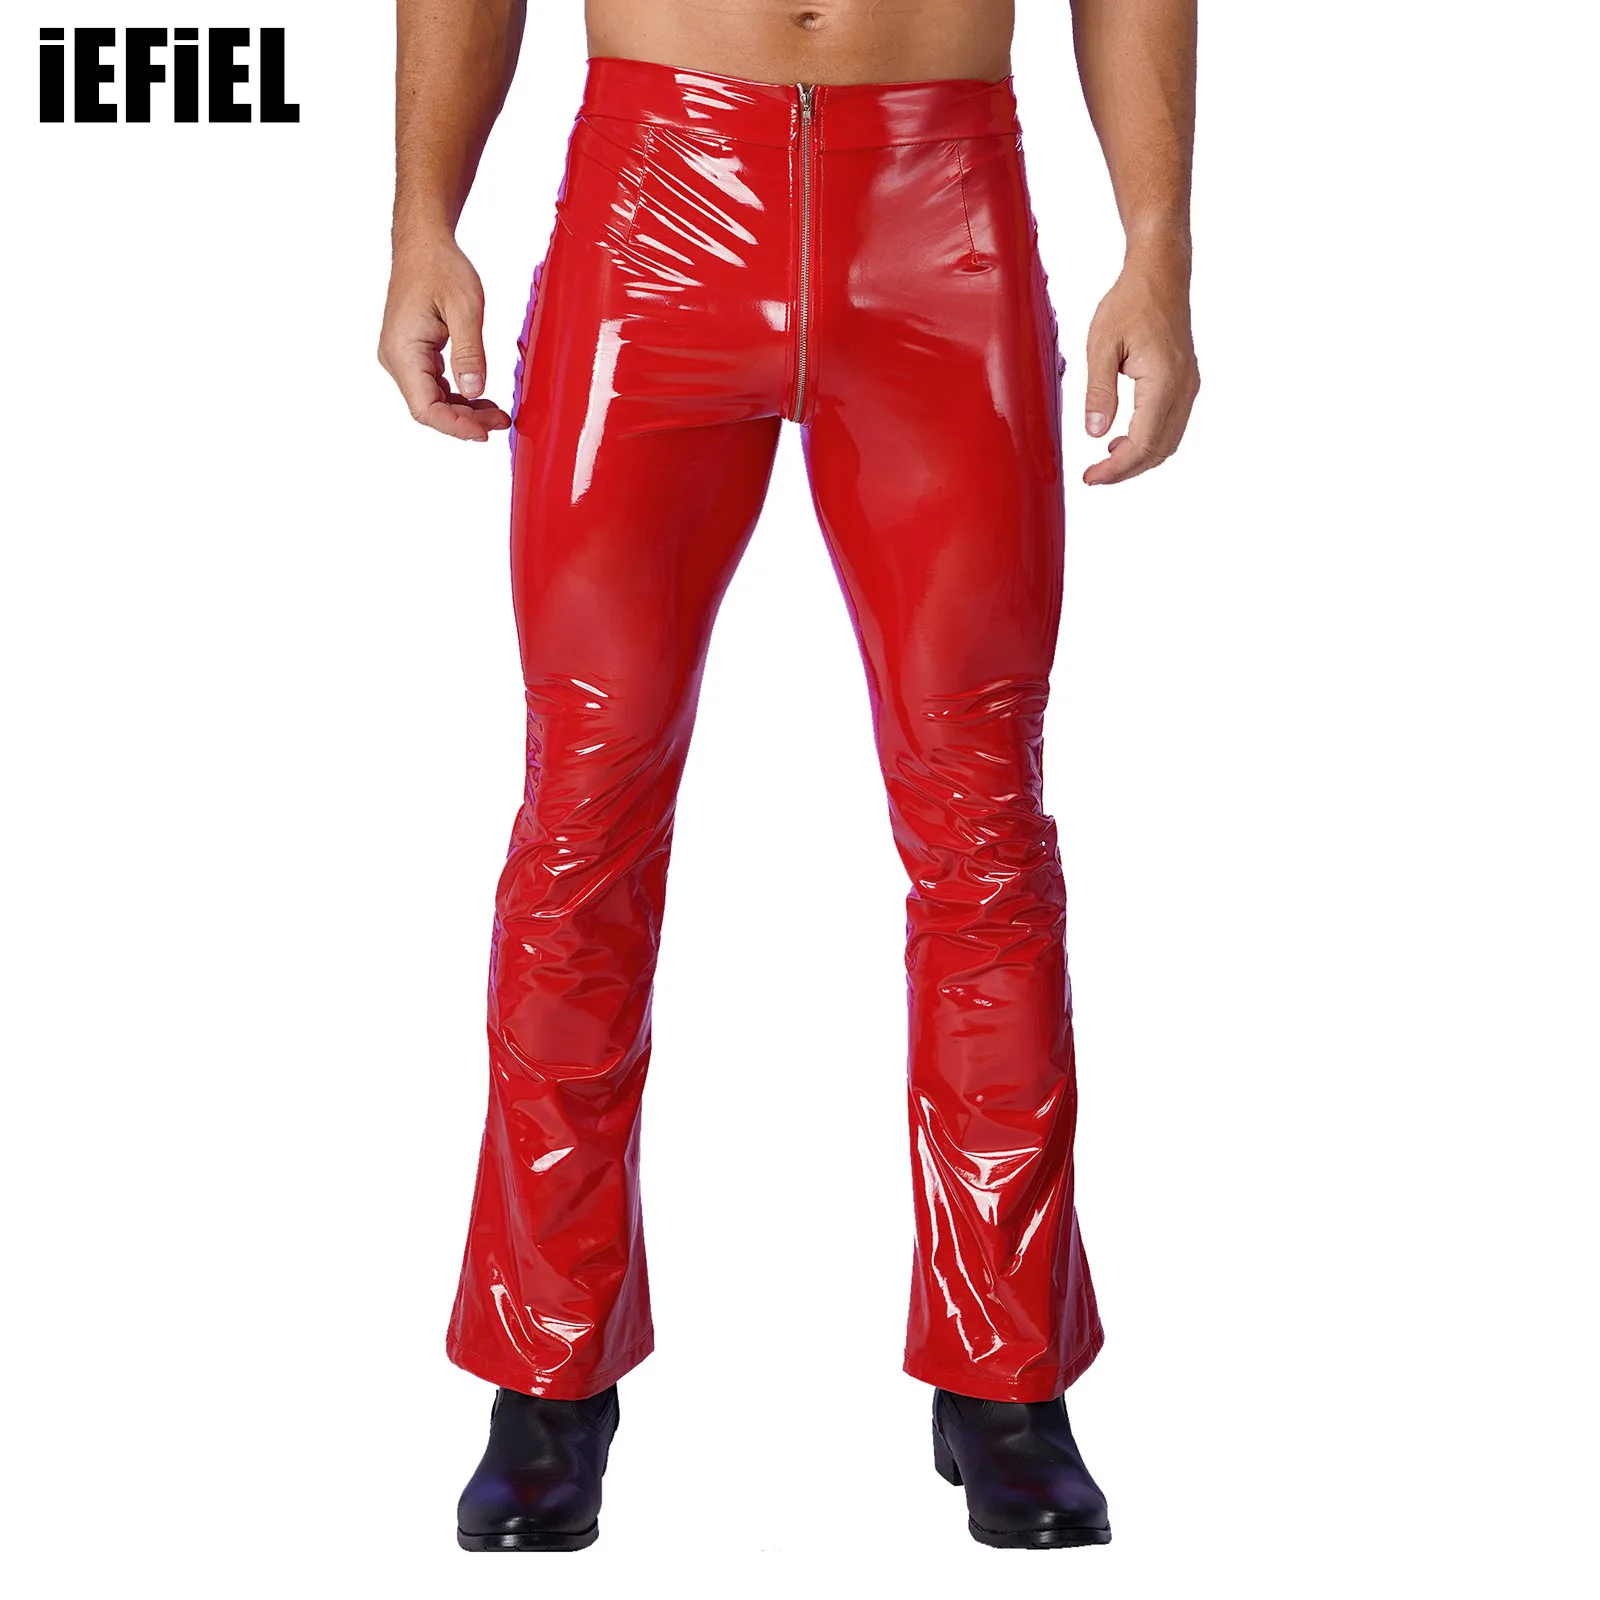 

Mens Glossy Patent Leather Flare Pants Zipper Crotch Bell Bottom Pants Wet Look Costumes for Nightclub Halloween Naughty Cosplay